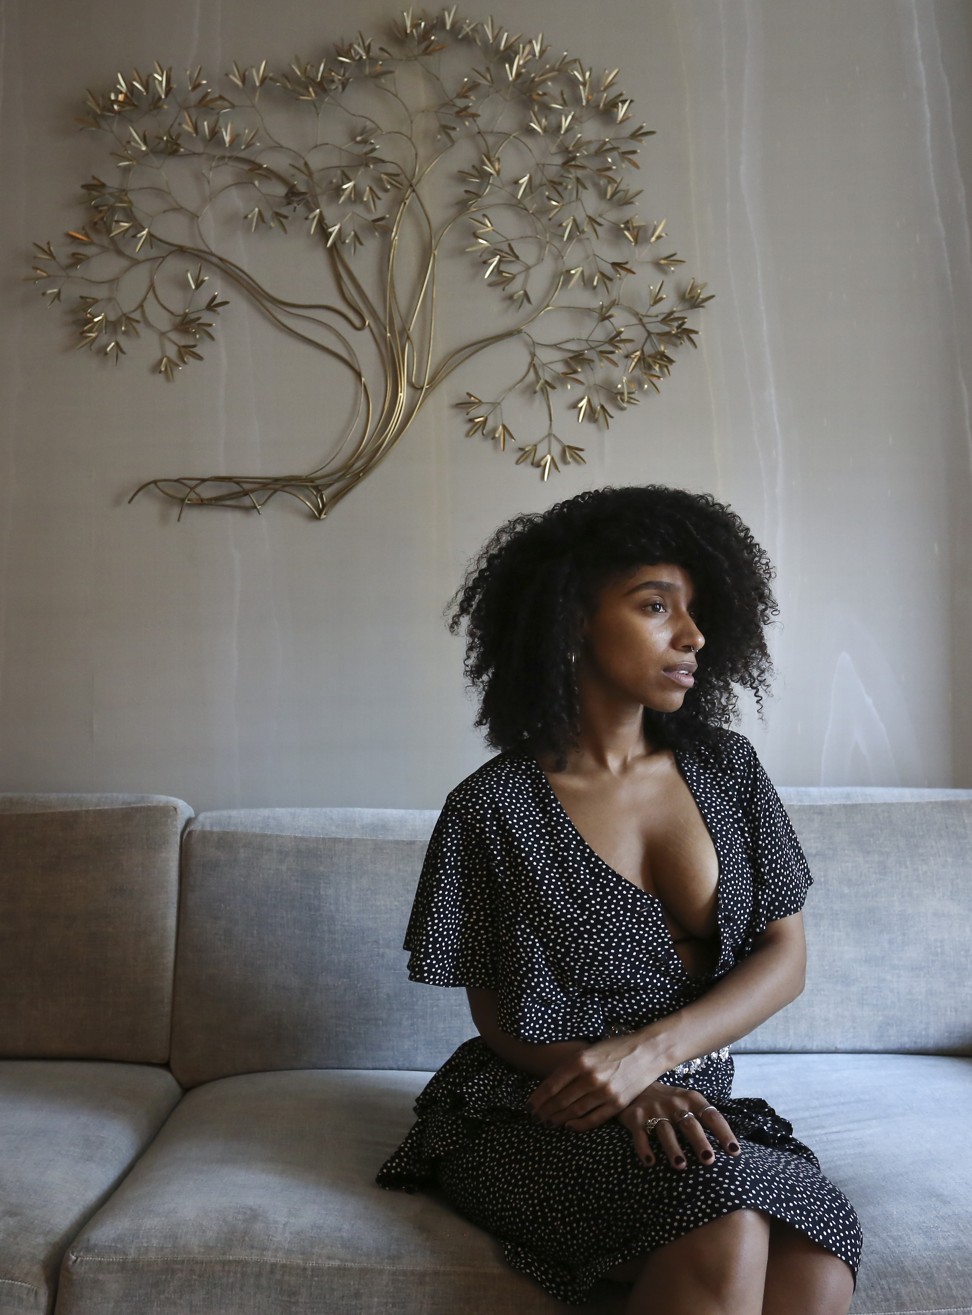 La Havas collaborated with Prince in 2014, two years before his death. Photo: Jonathan Wong